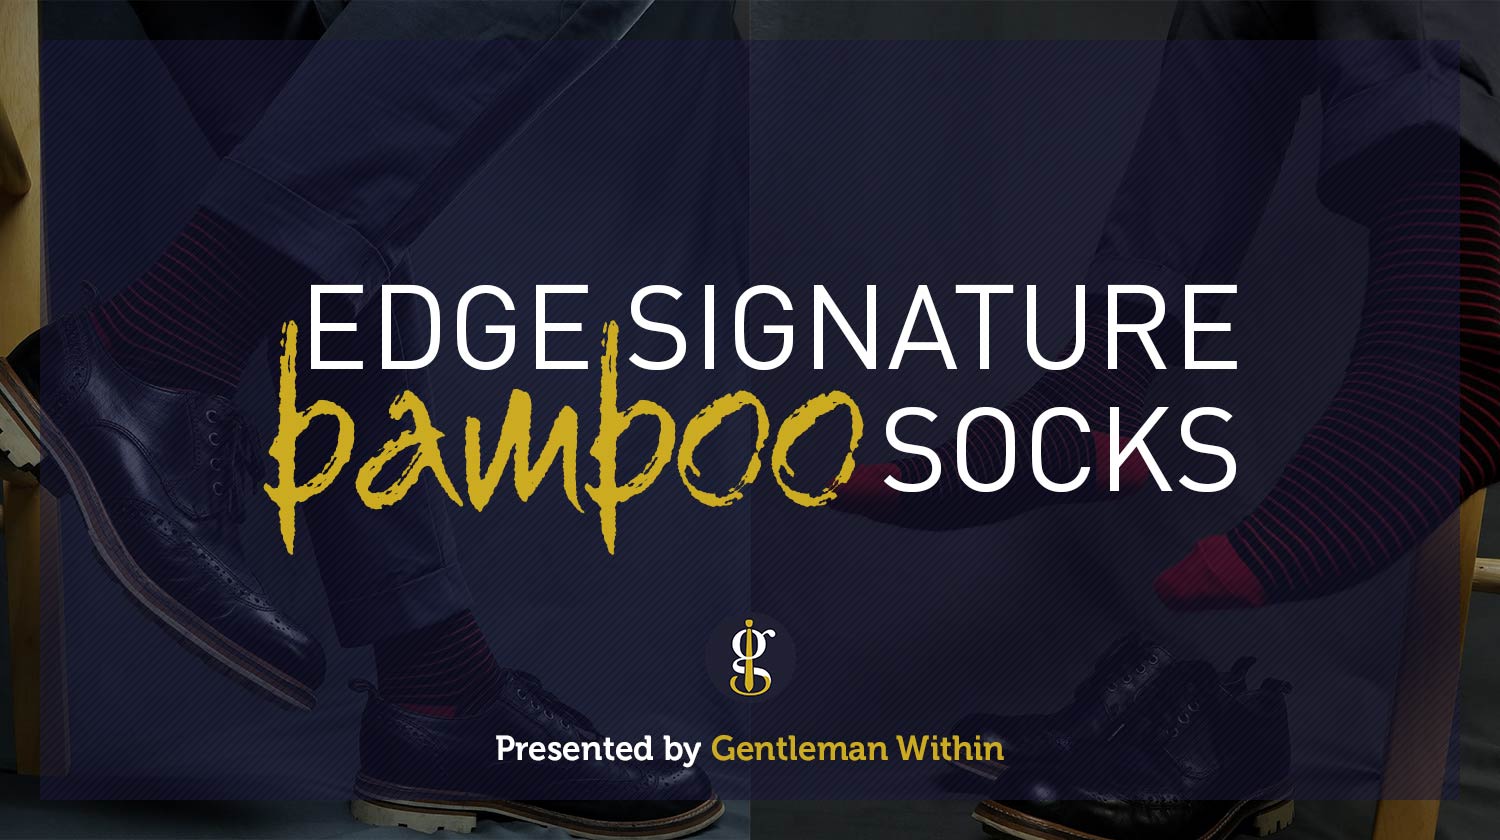 A Look At Edge Signature Men's Bamboo Socks | GENTLEMAN WITHIN